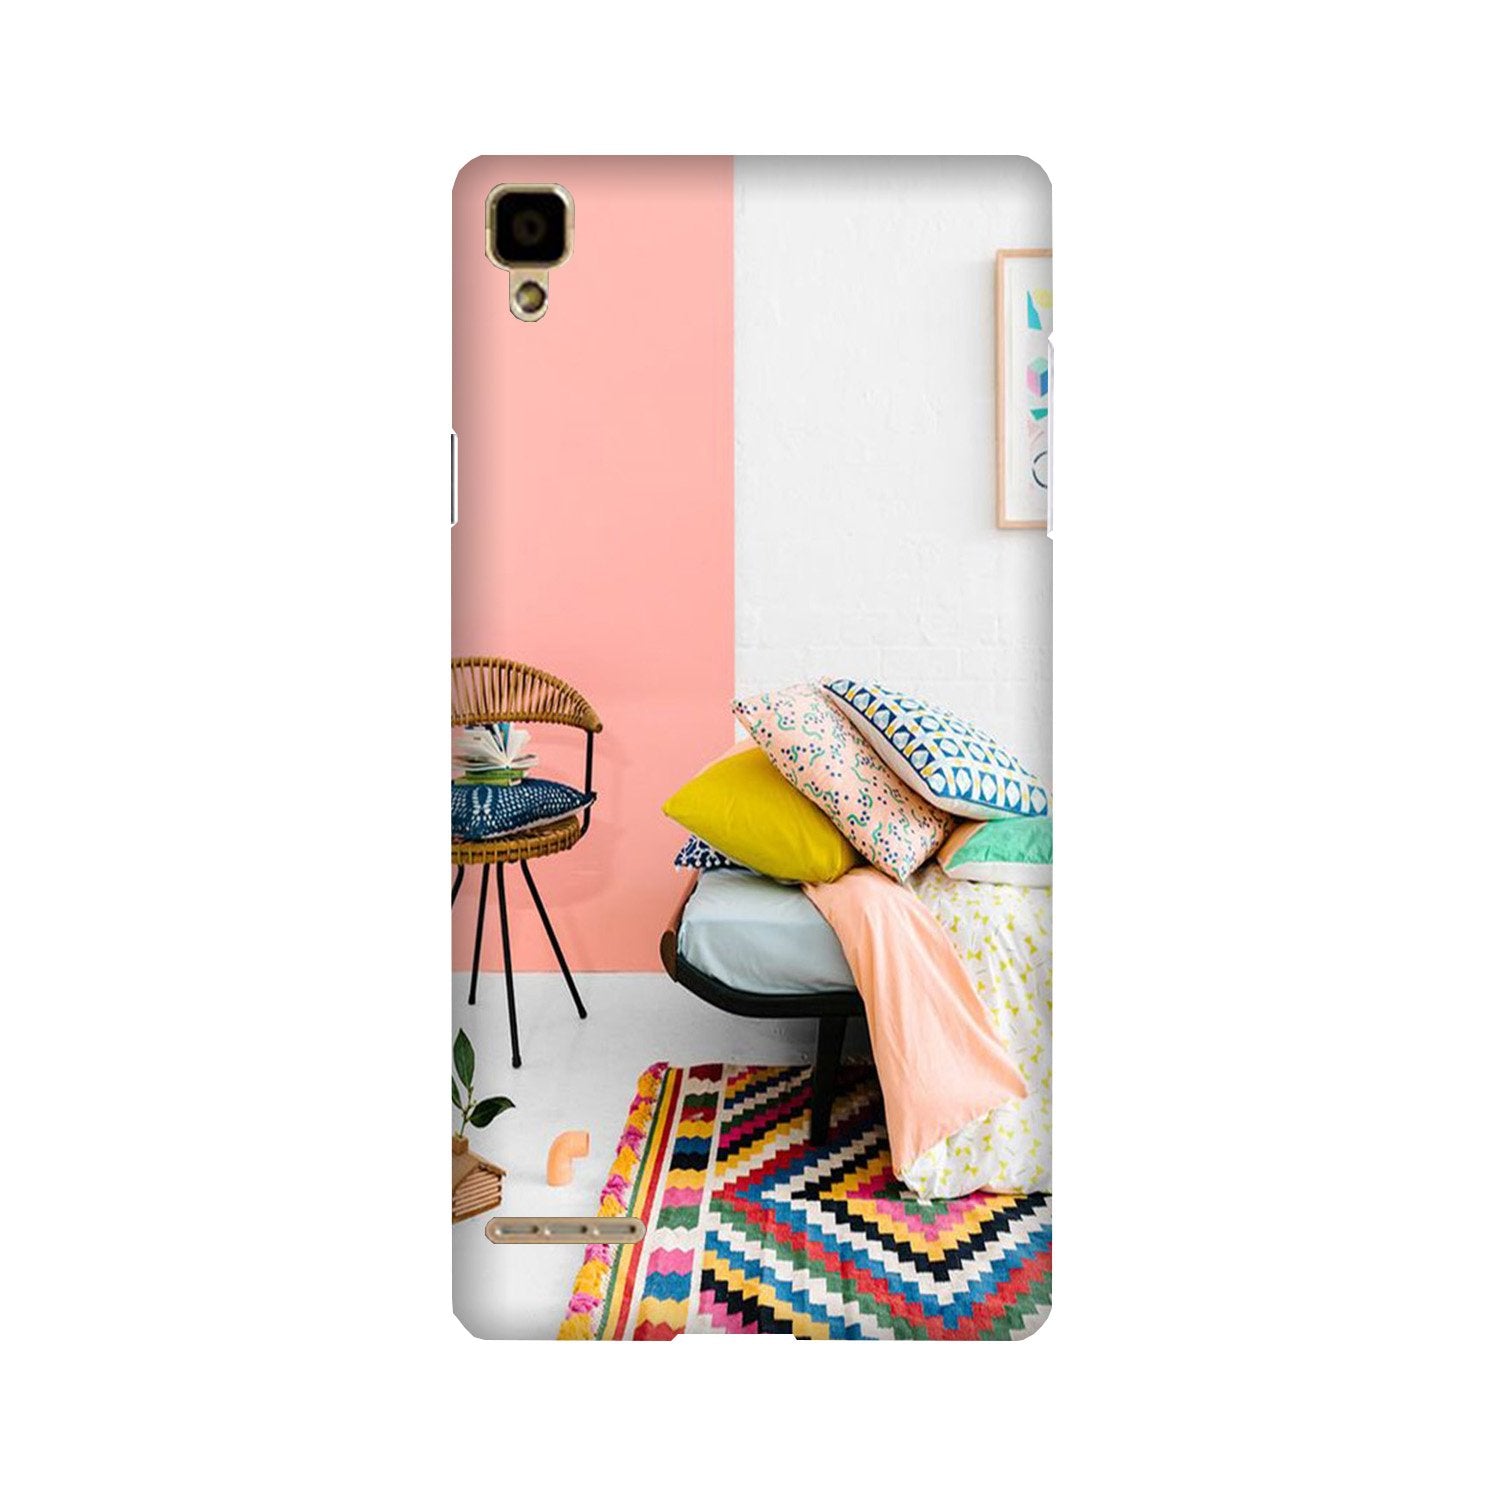 Home Décor Case for Oppo F1